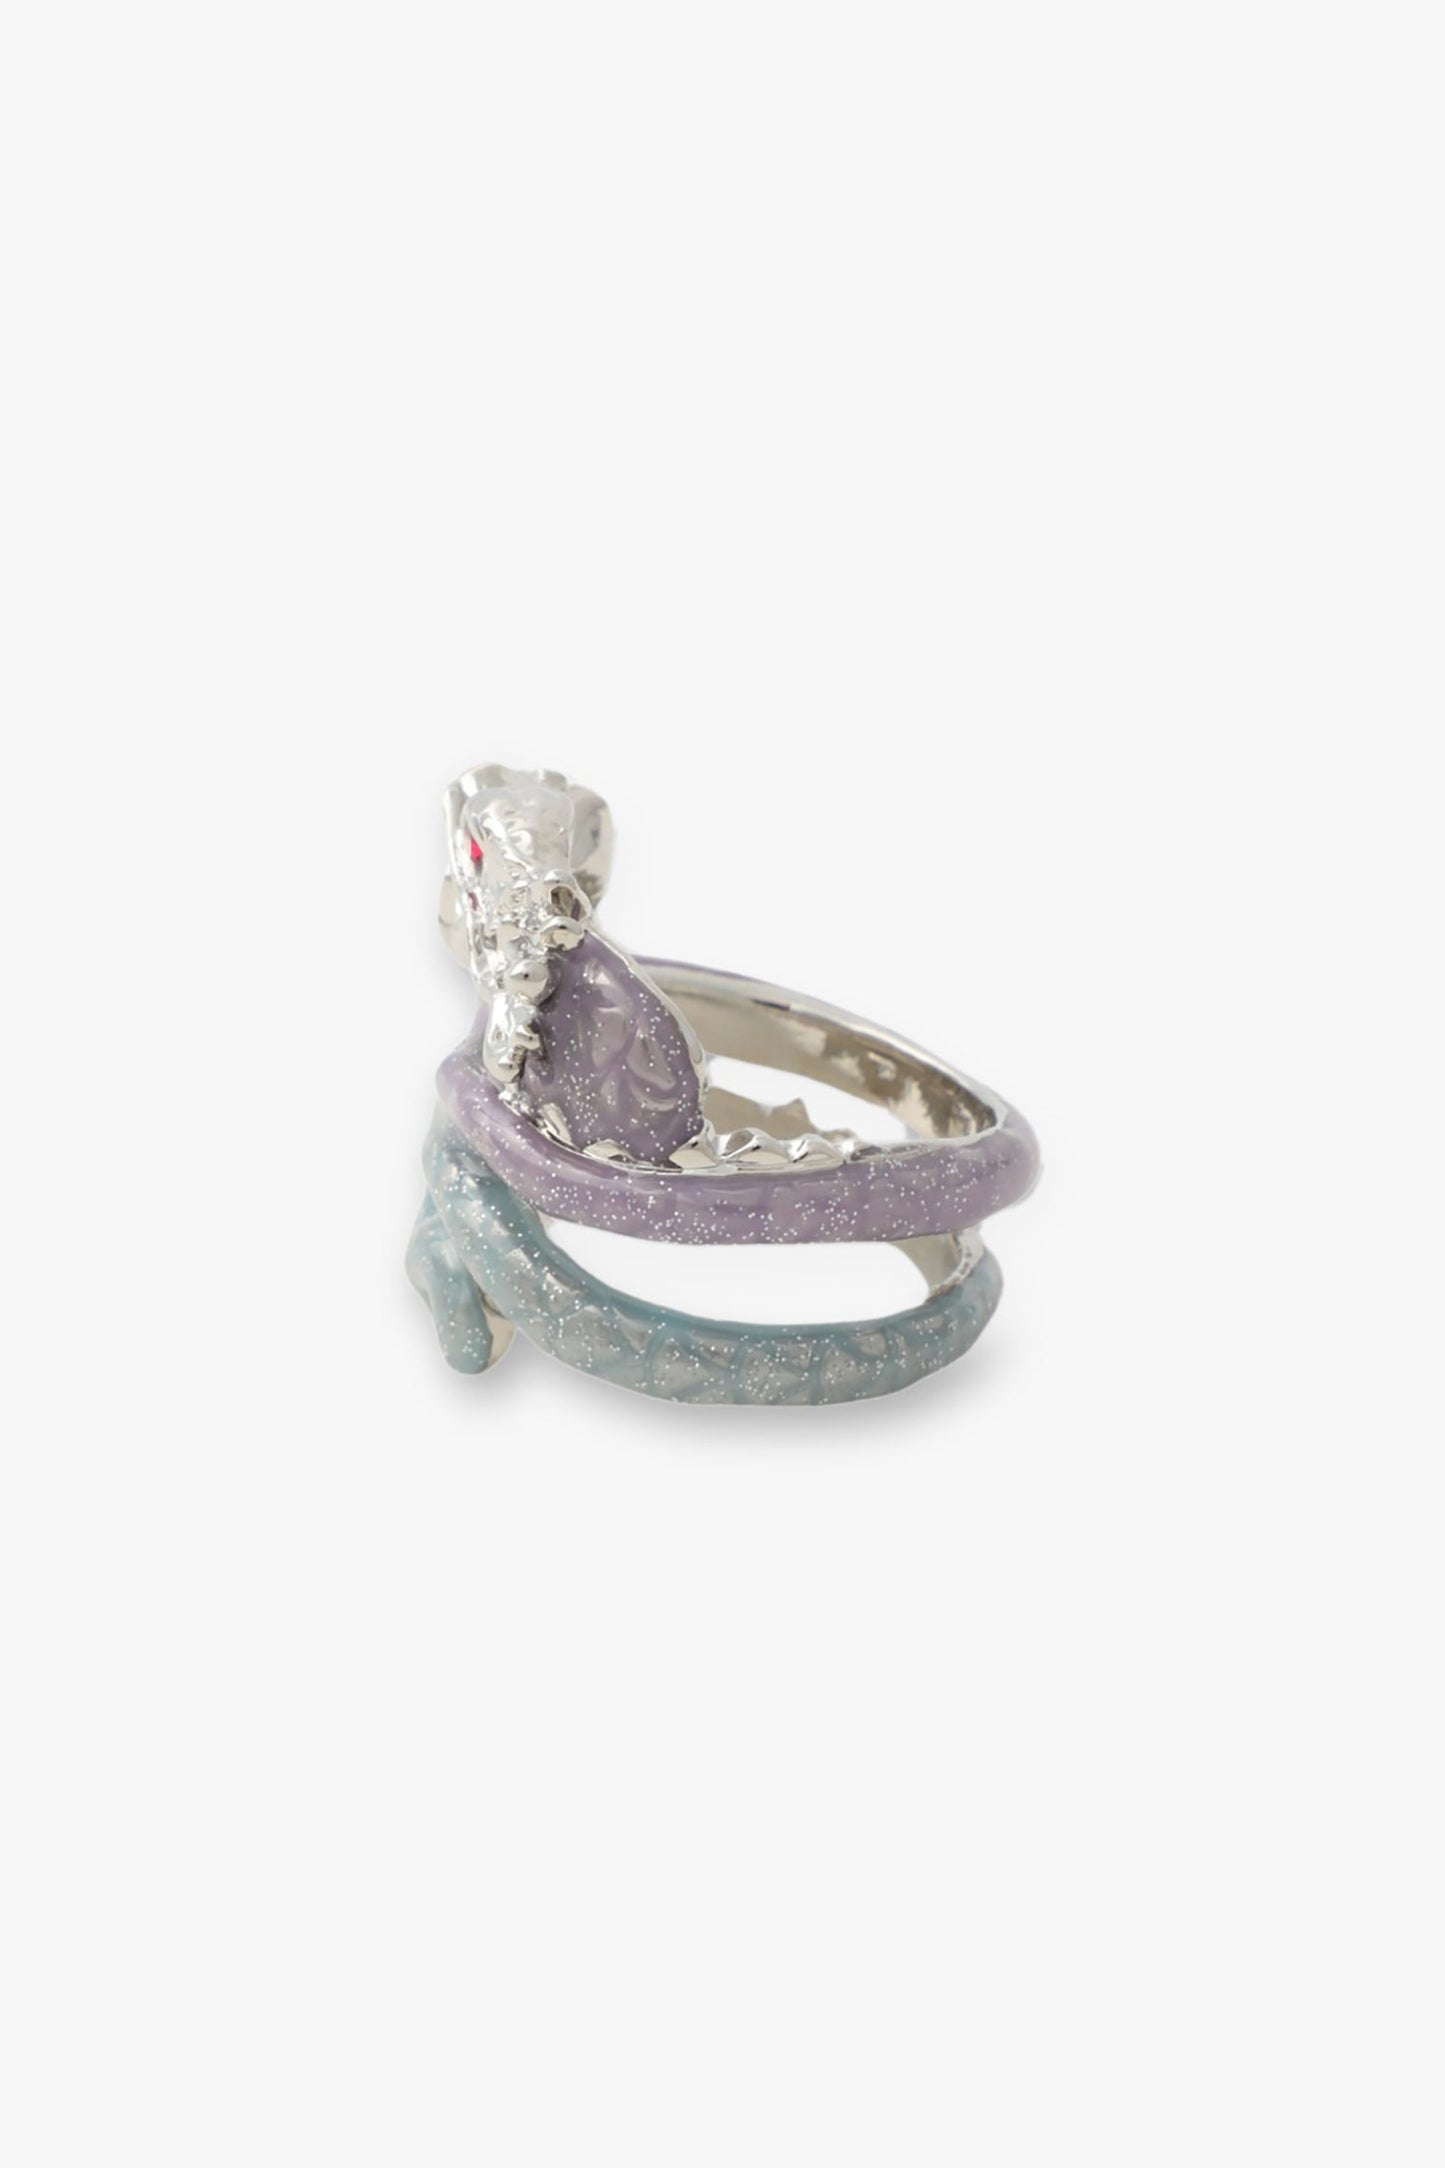 The coiled style ring accented with the brand's iconic Anna Sui rose